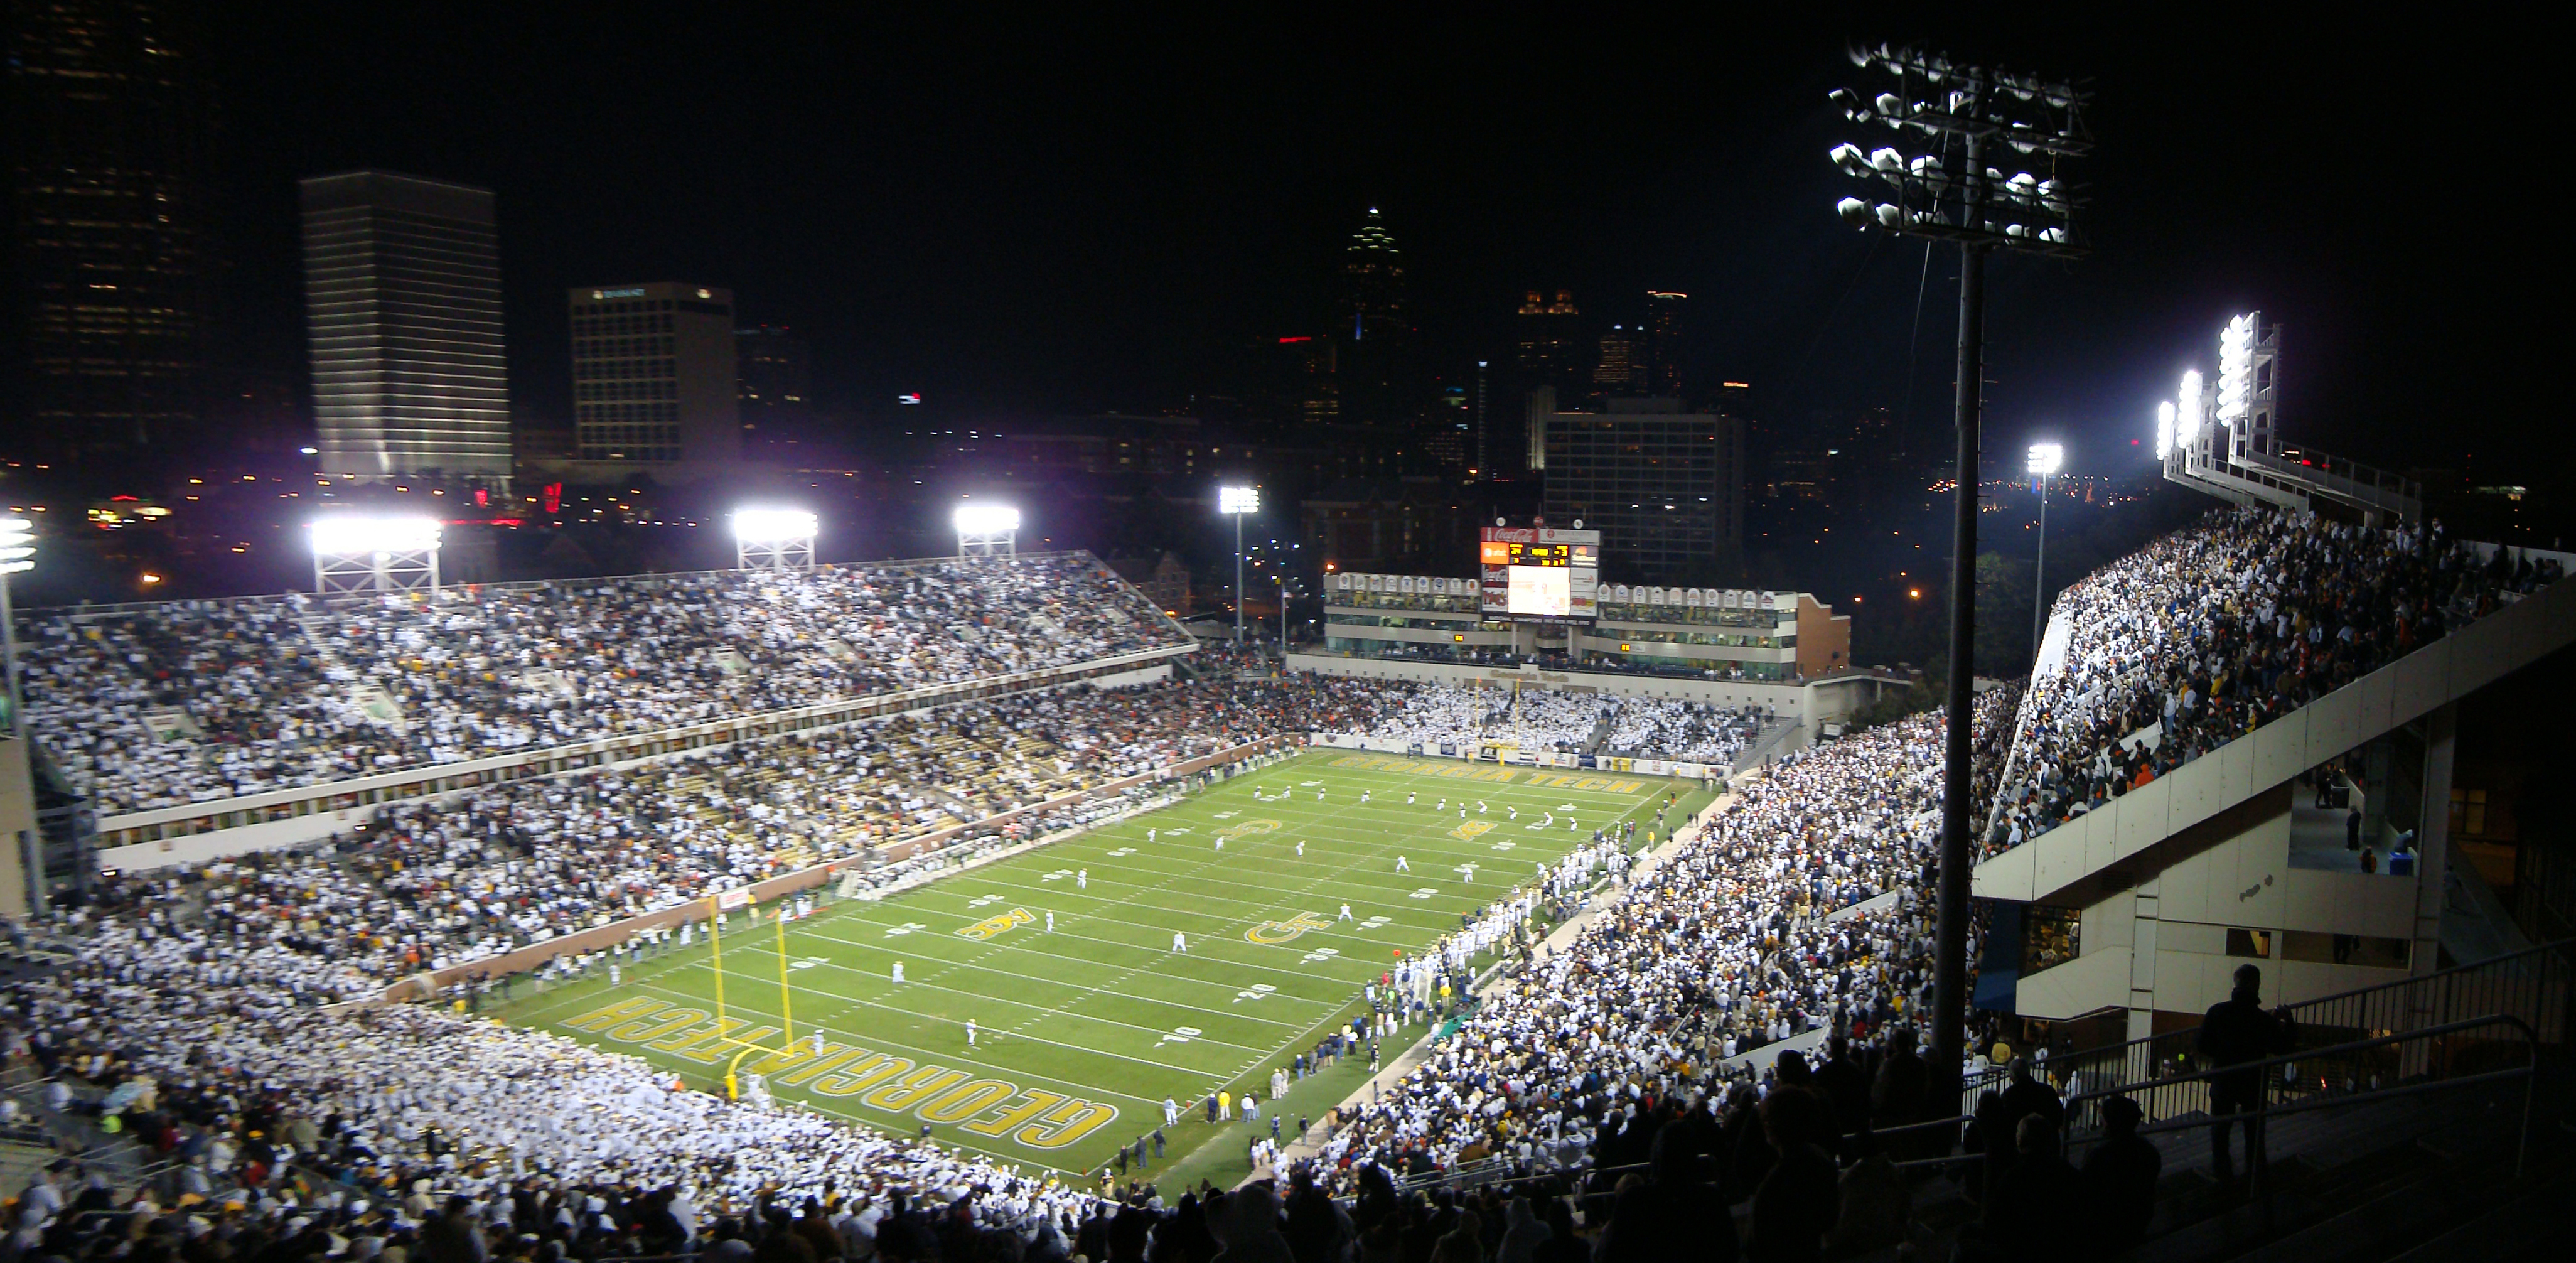 What's your favorite photo of your team's stadium? Here's mine : CFB